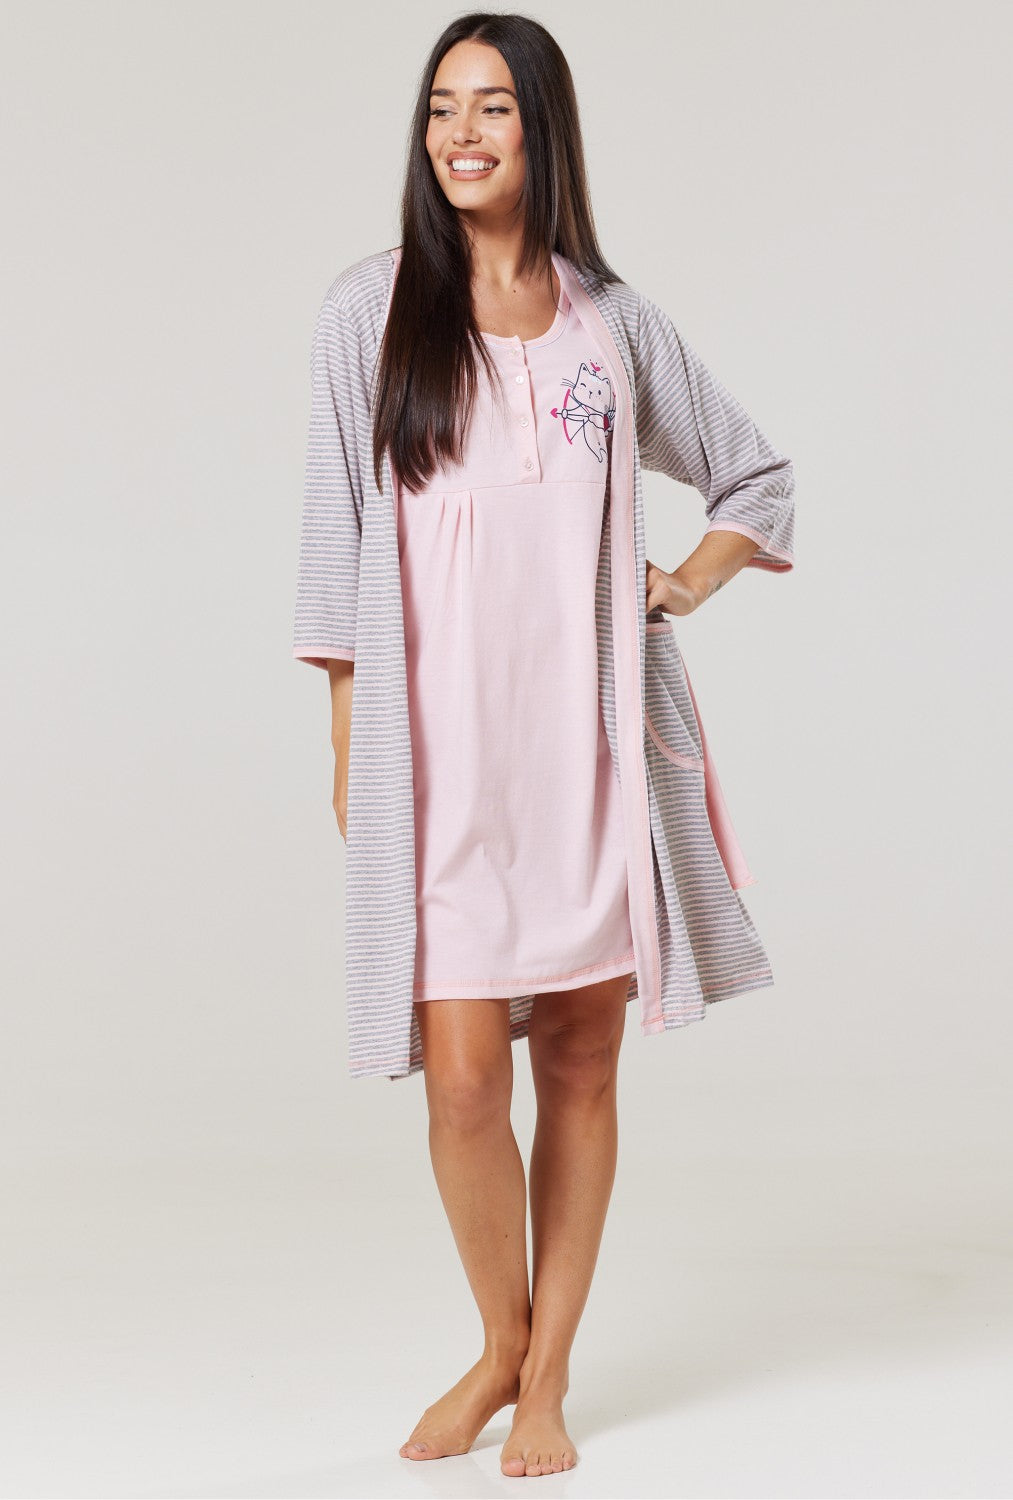 MijaCulture Labour Maternity and Nursing Nightdress Delivery Gown 4123  (UK12 / L, Graphit/with Feathers) : Amazon.co.uk: Fashion